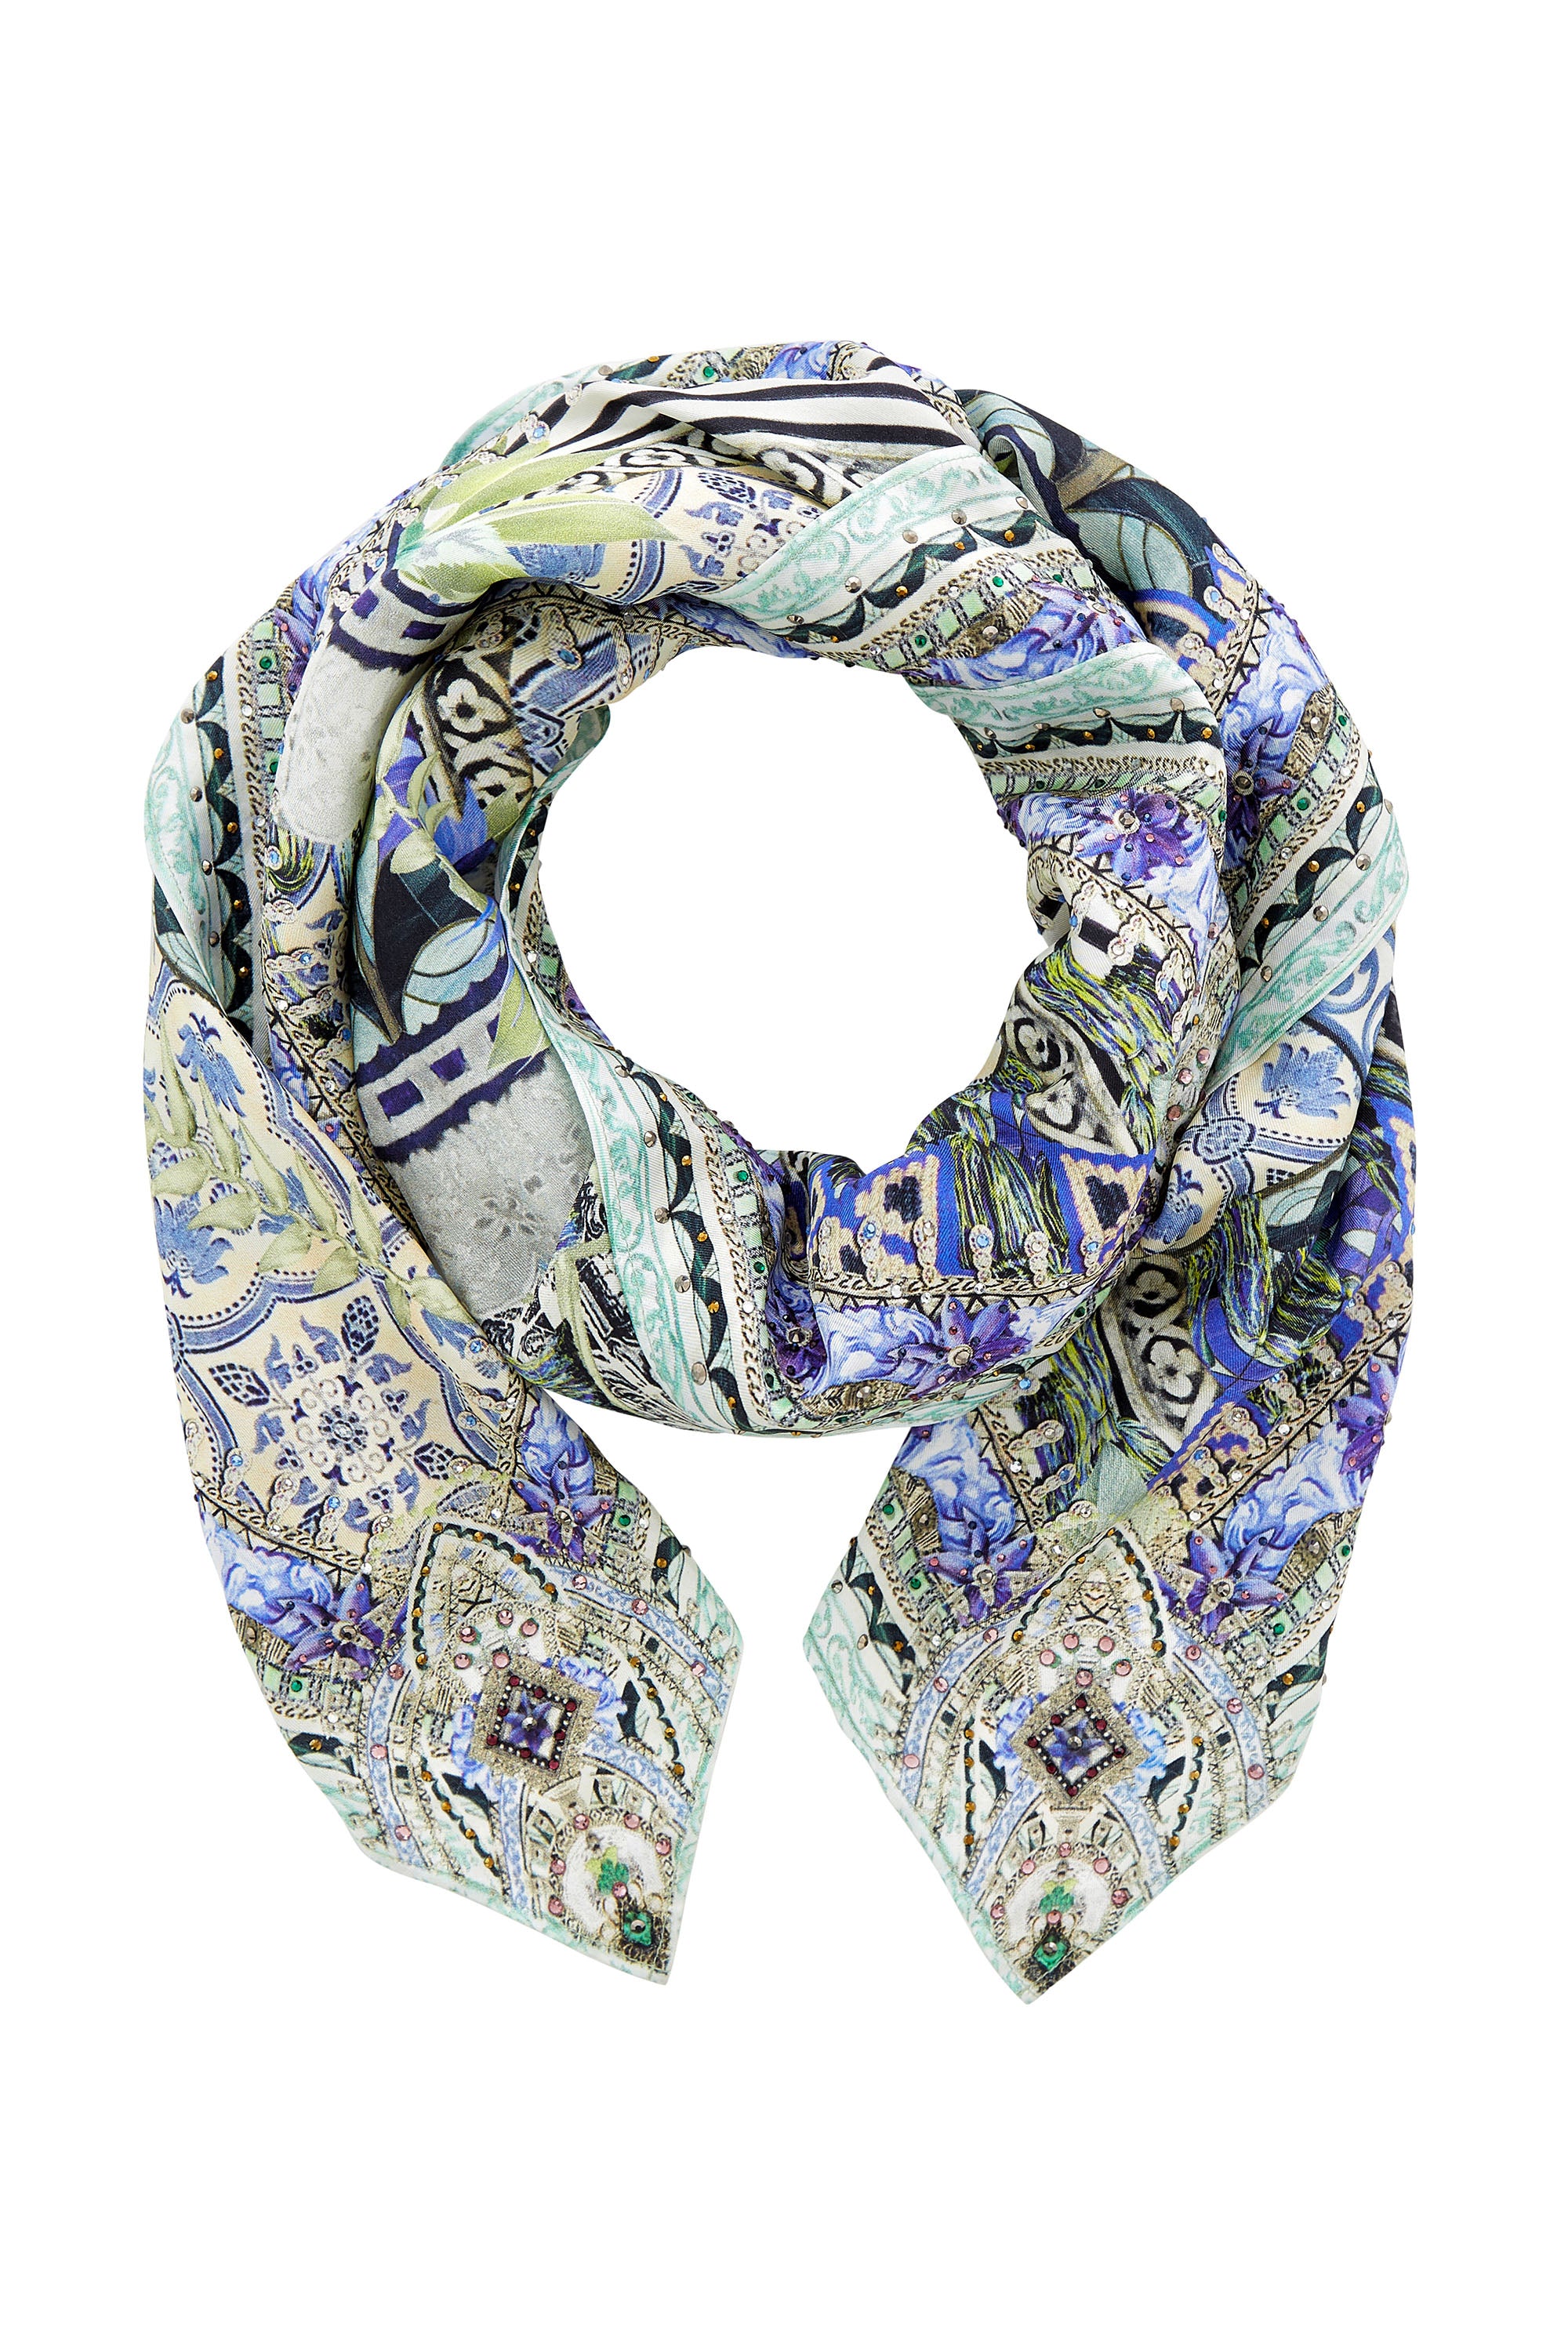 THE SWEET ESCAPE LARGE SQUARE SCARF